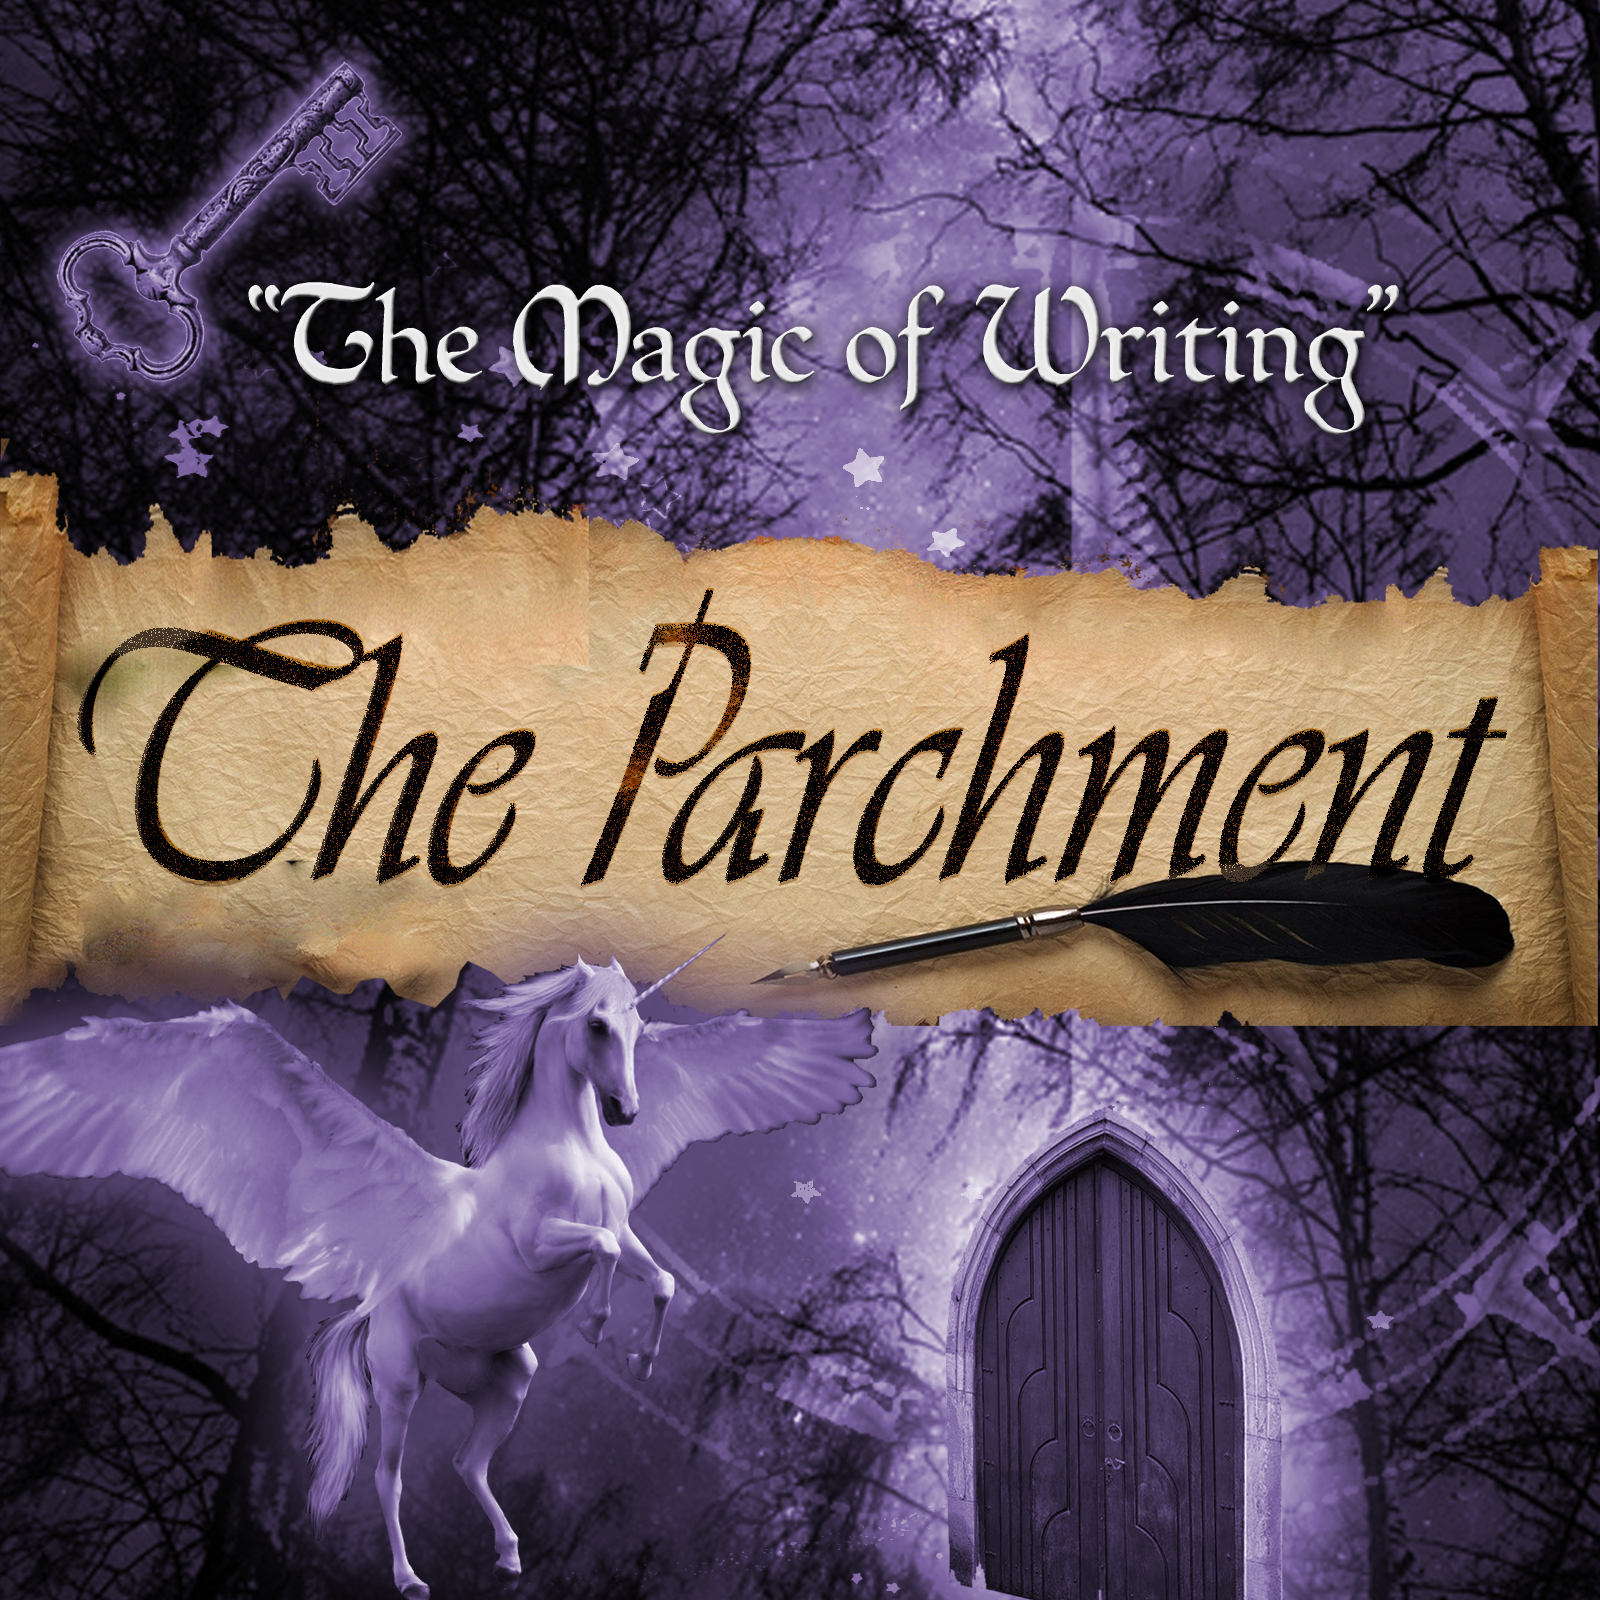 THE MAGIC OF WRITING - THE PARCHMENT